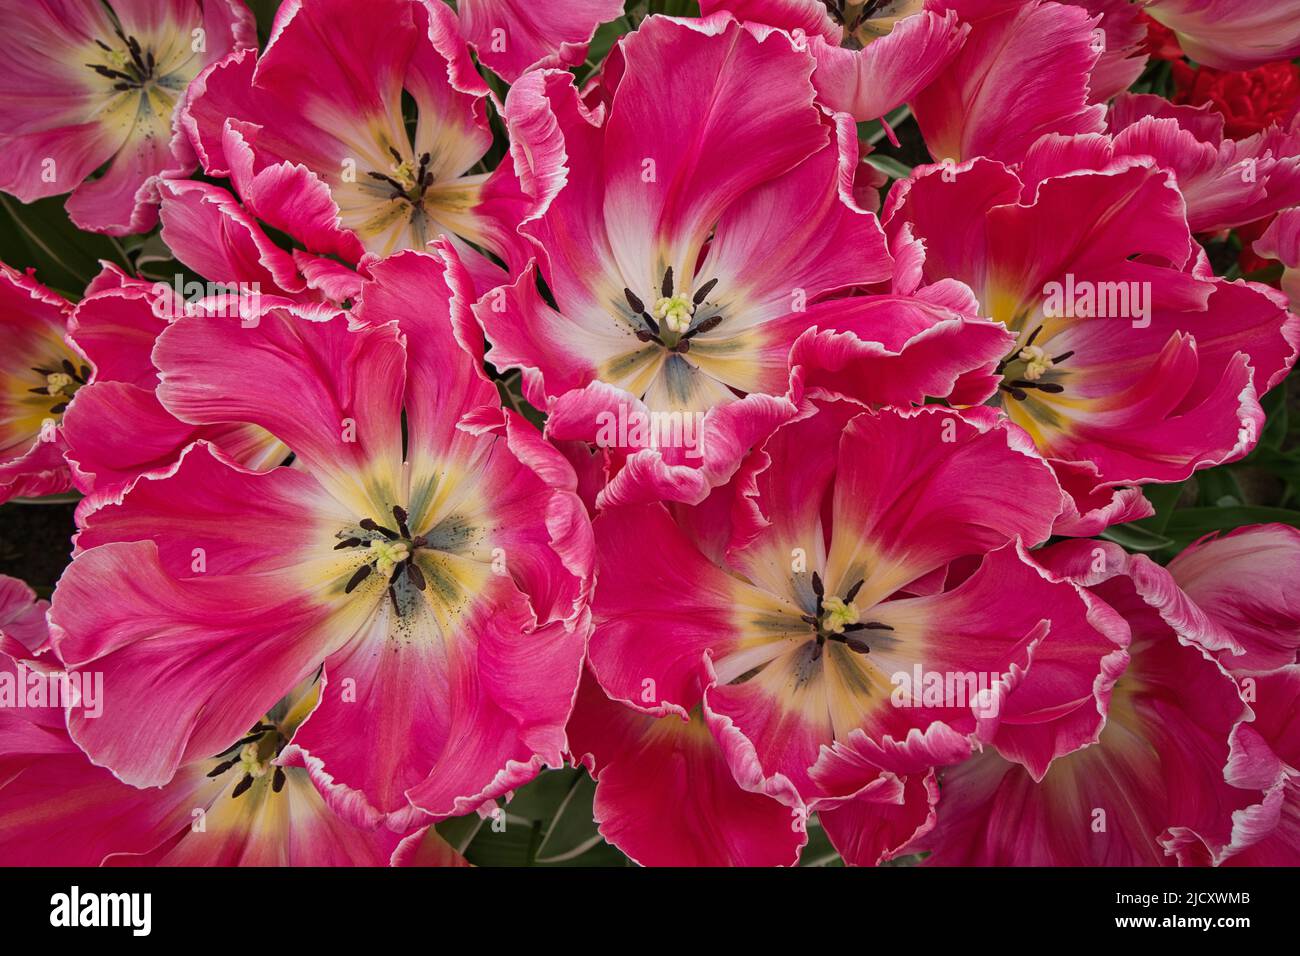 Several white and pink blooming flowers in flower bed Stock Photo